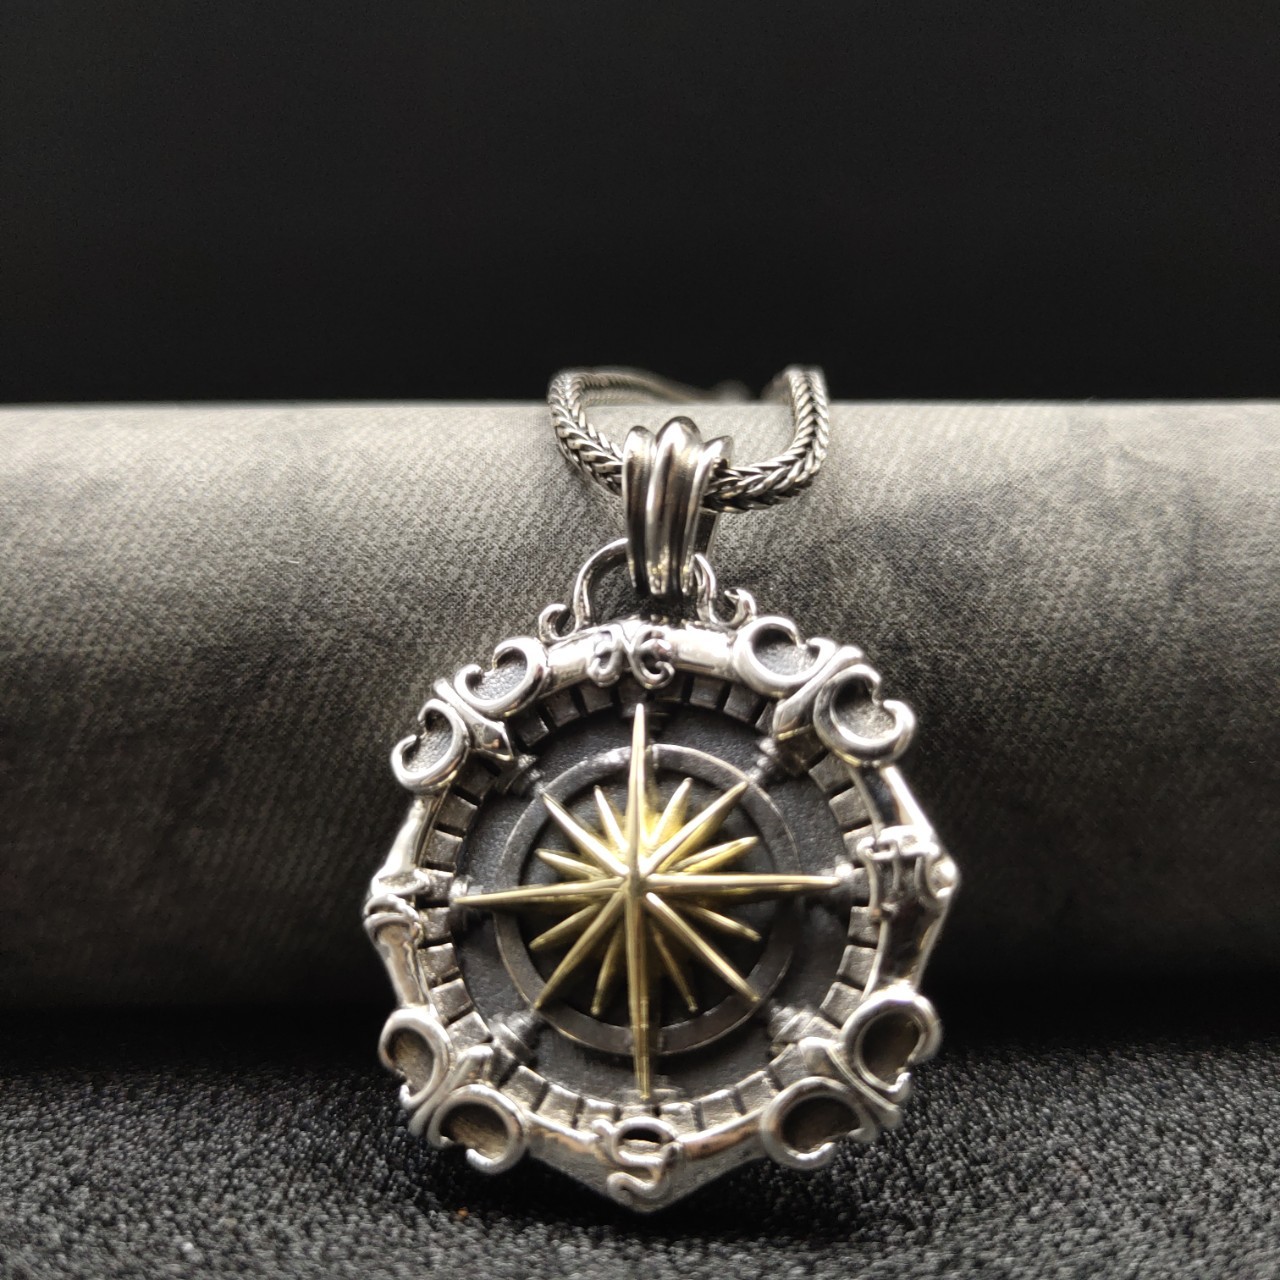 "Star-Shaped Pendant - A Beacon of Timeless Elegance"